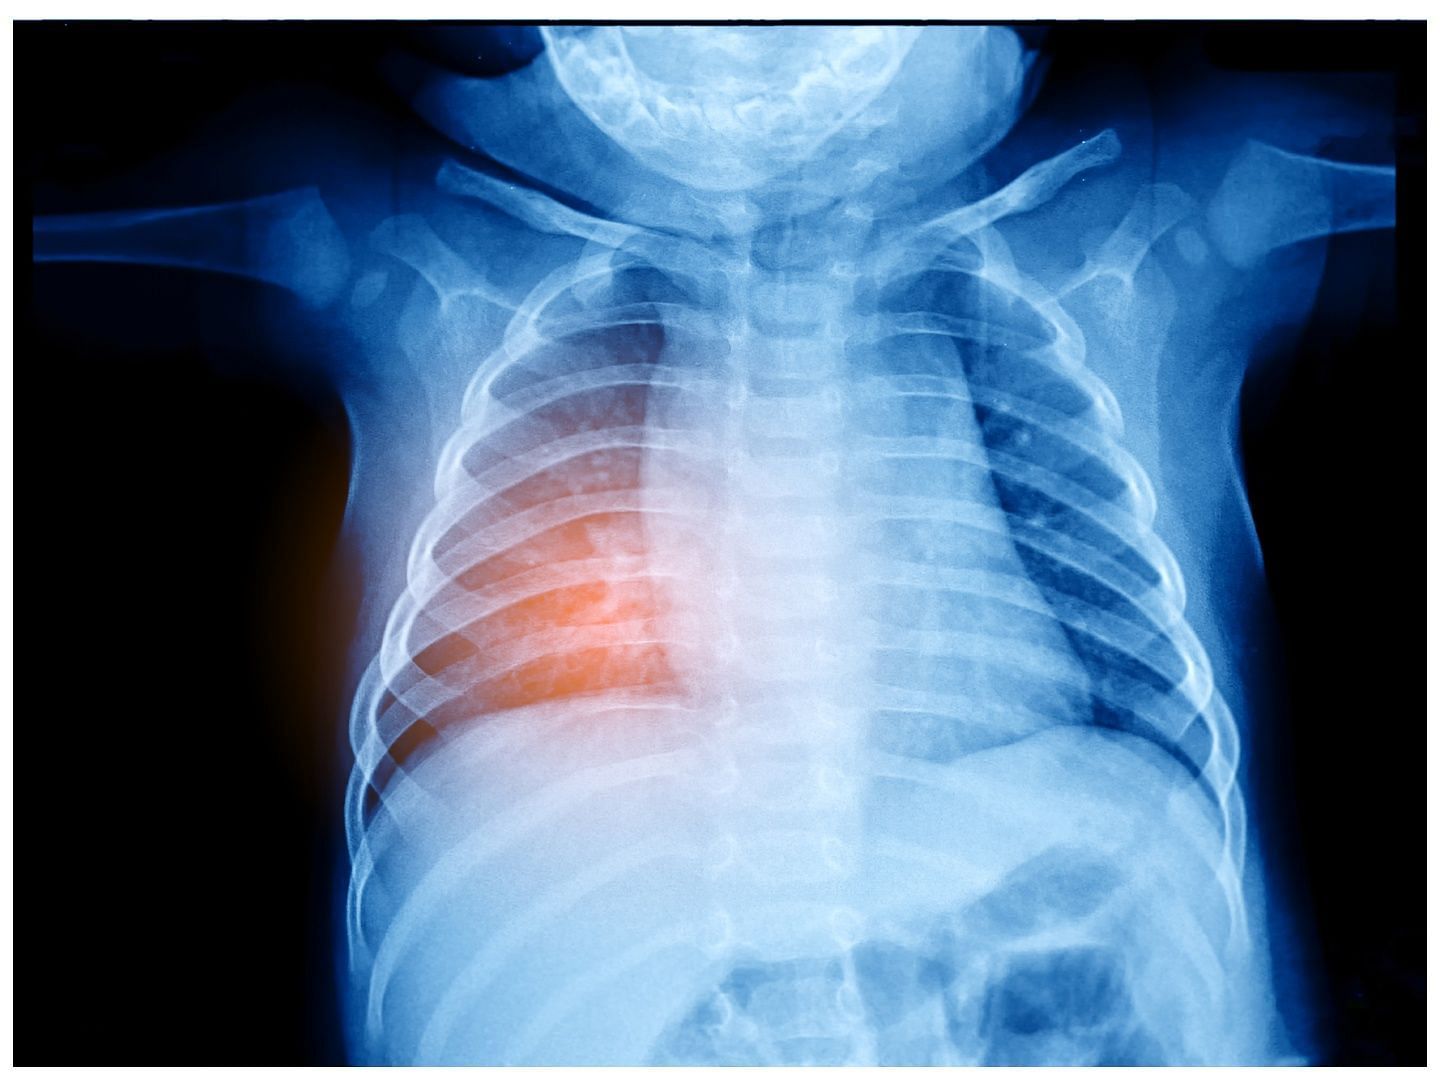 Injury to your rib can cause pain (Image via Vecteezy)